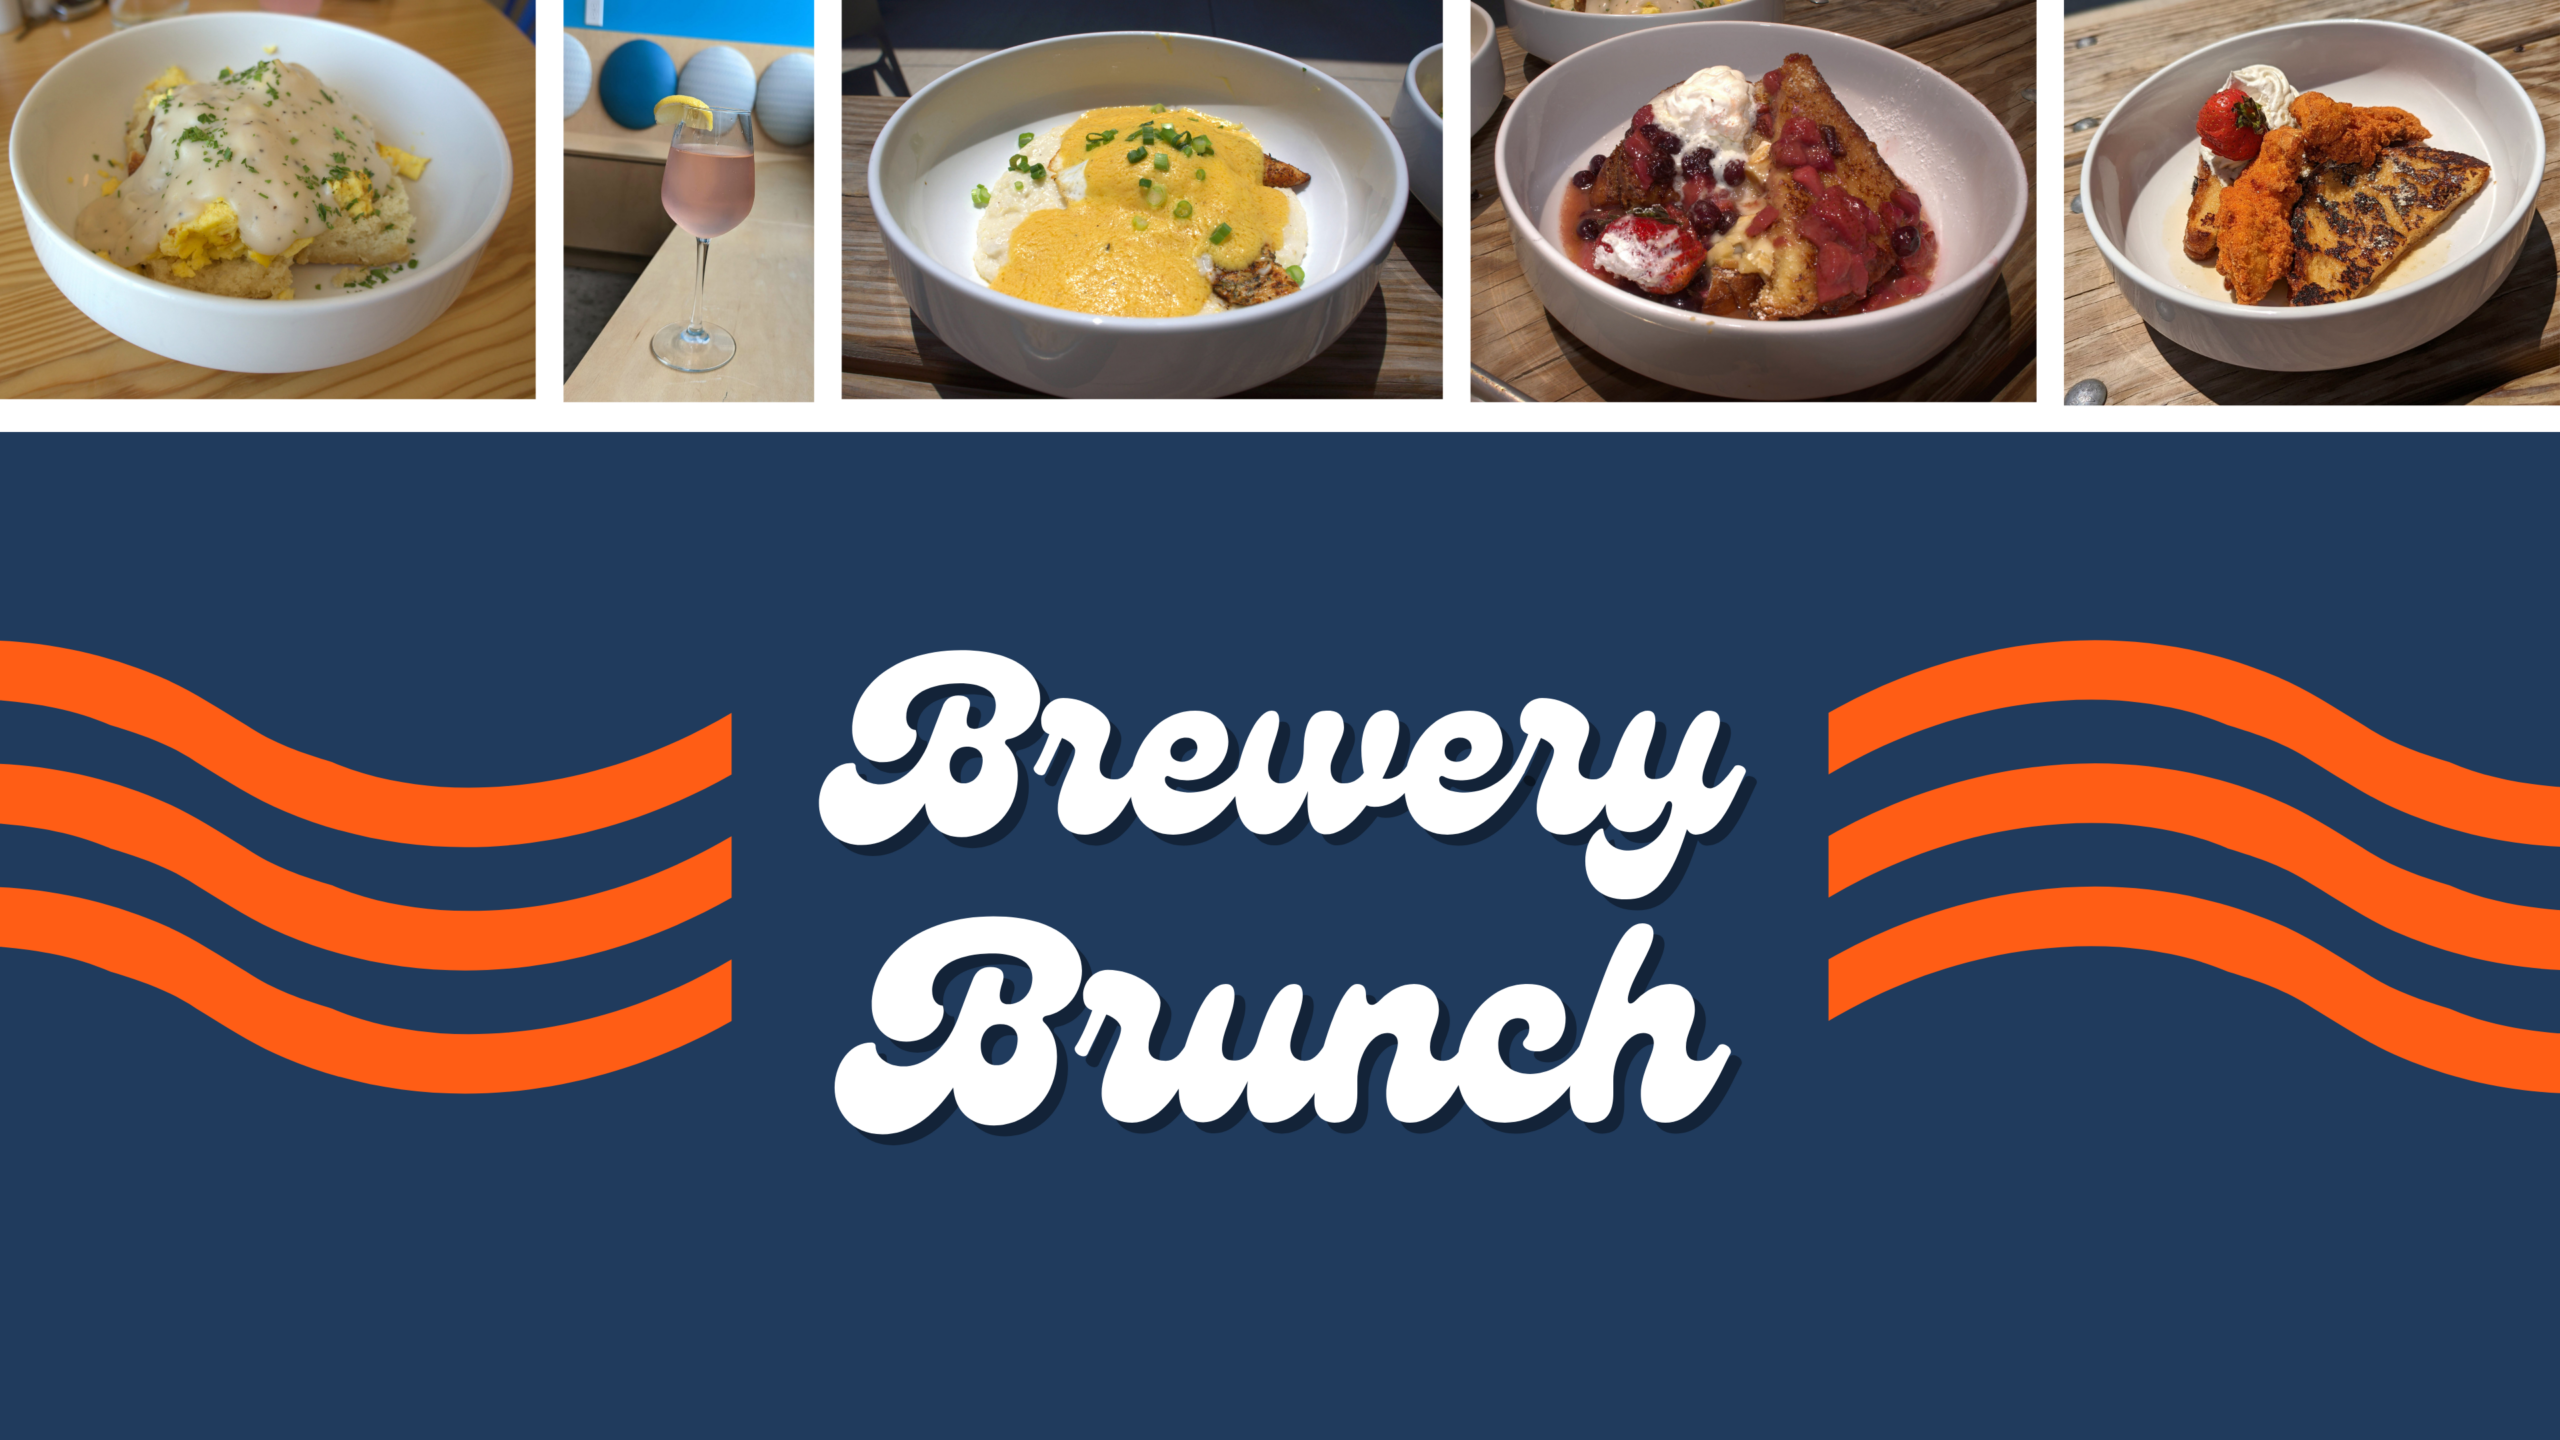 Saturday & Sunday Brewery Brunch at On Rotation